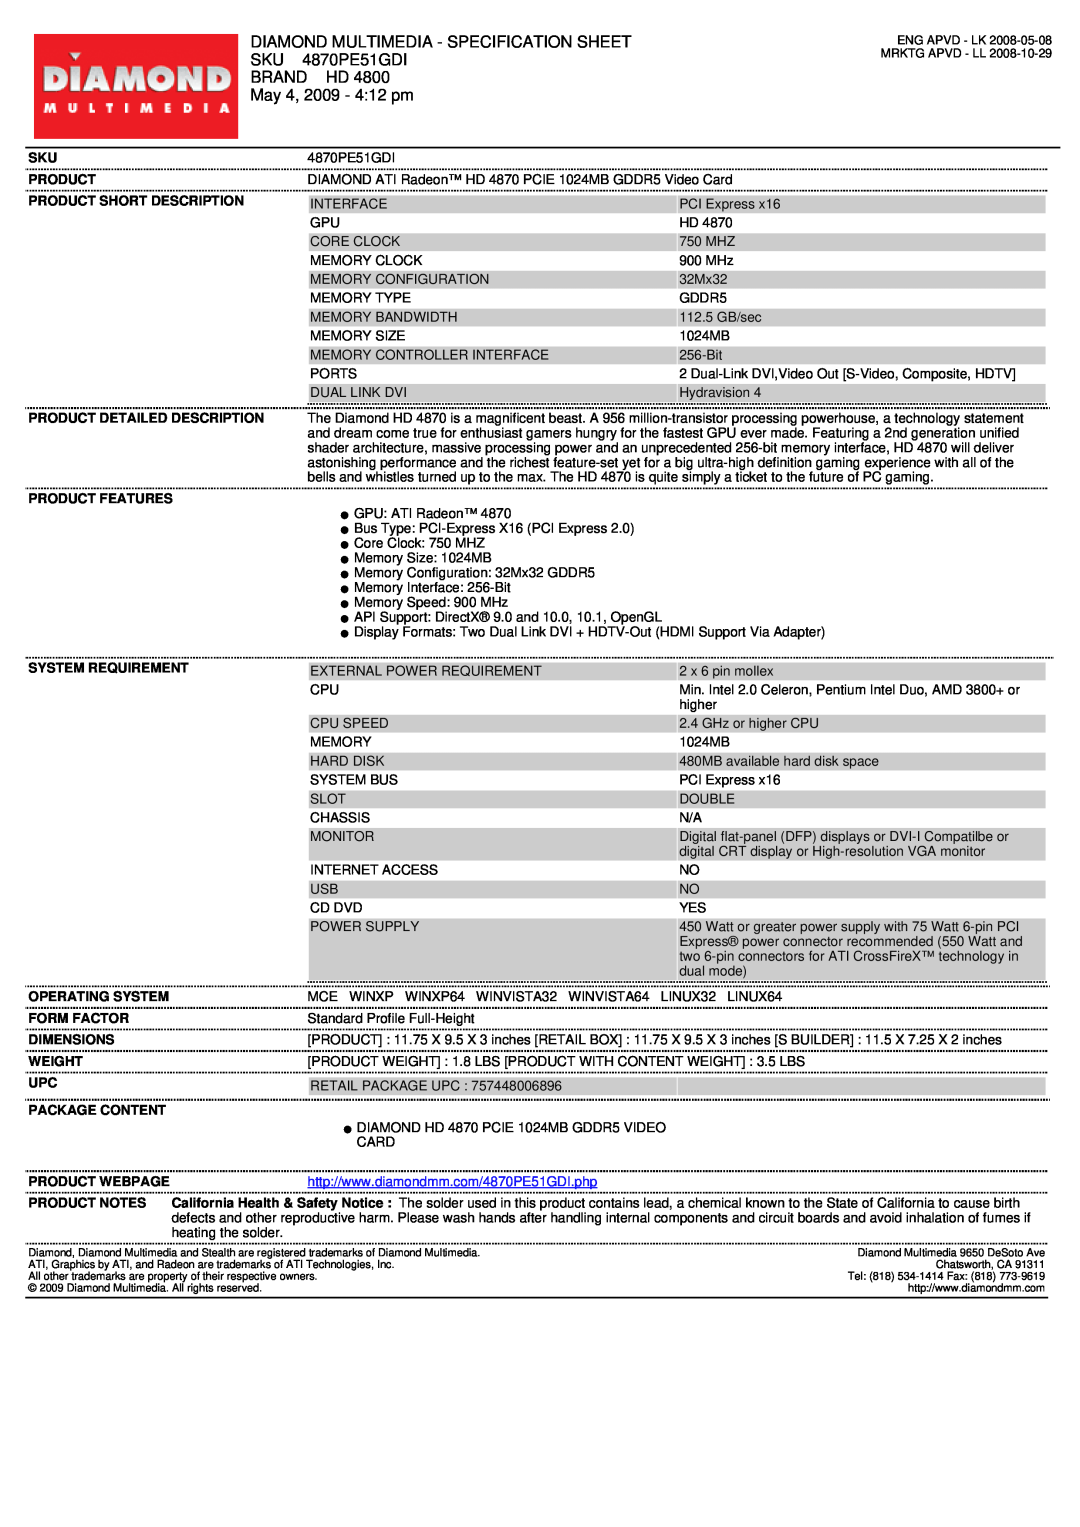 Diamond Multimedia HD 4870 PCIE specifications Diamond Multimedia - Specification Sheet, 4870PE51GDI, Brand Hd, Product 